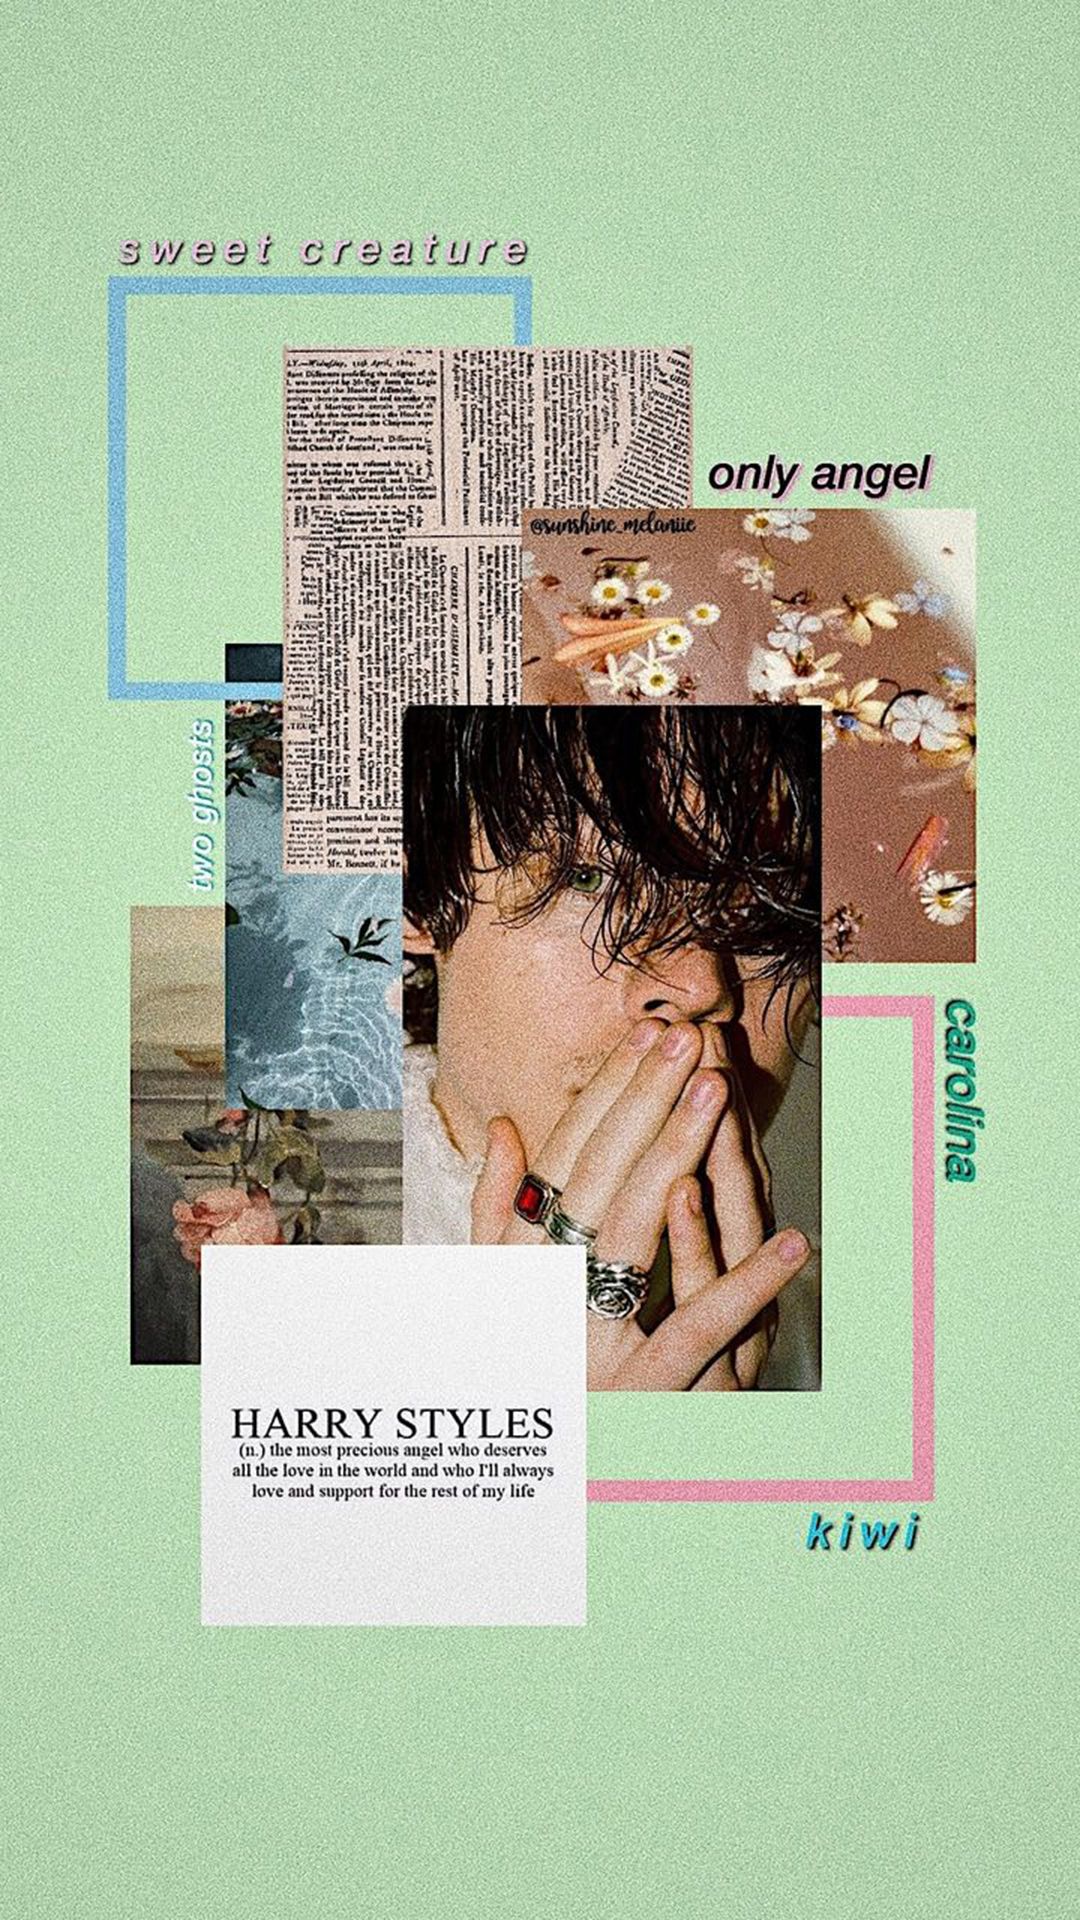 Harry Styles wallpaper I made for my phone! - Harry Styles